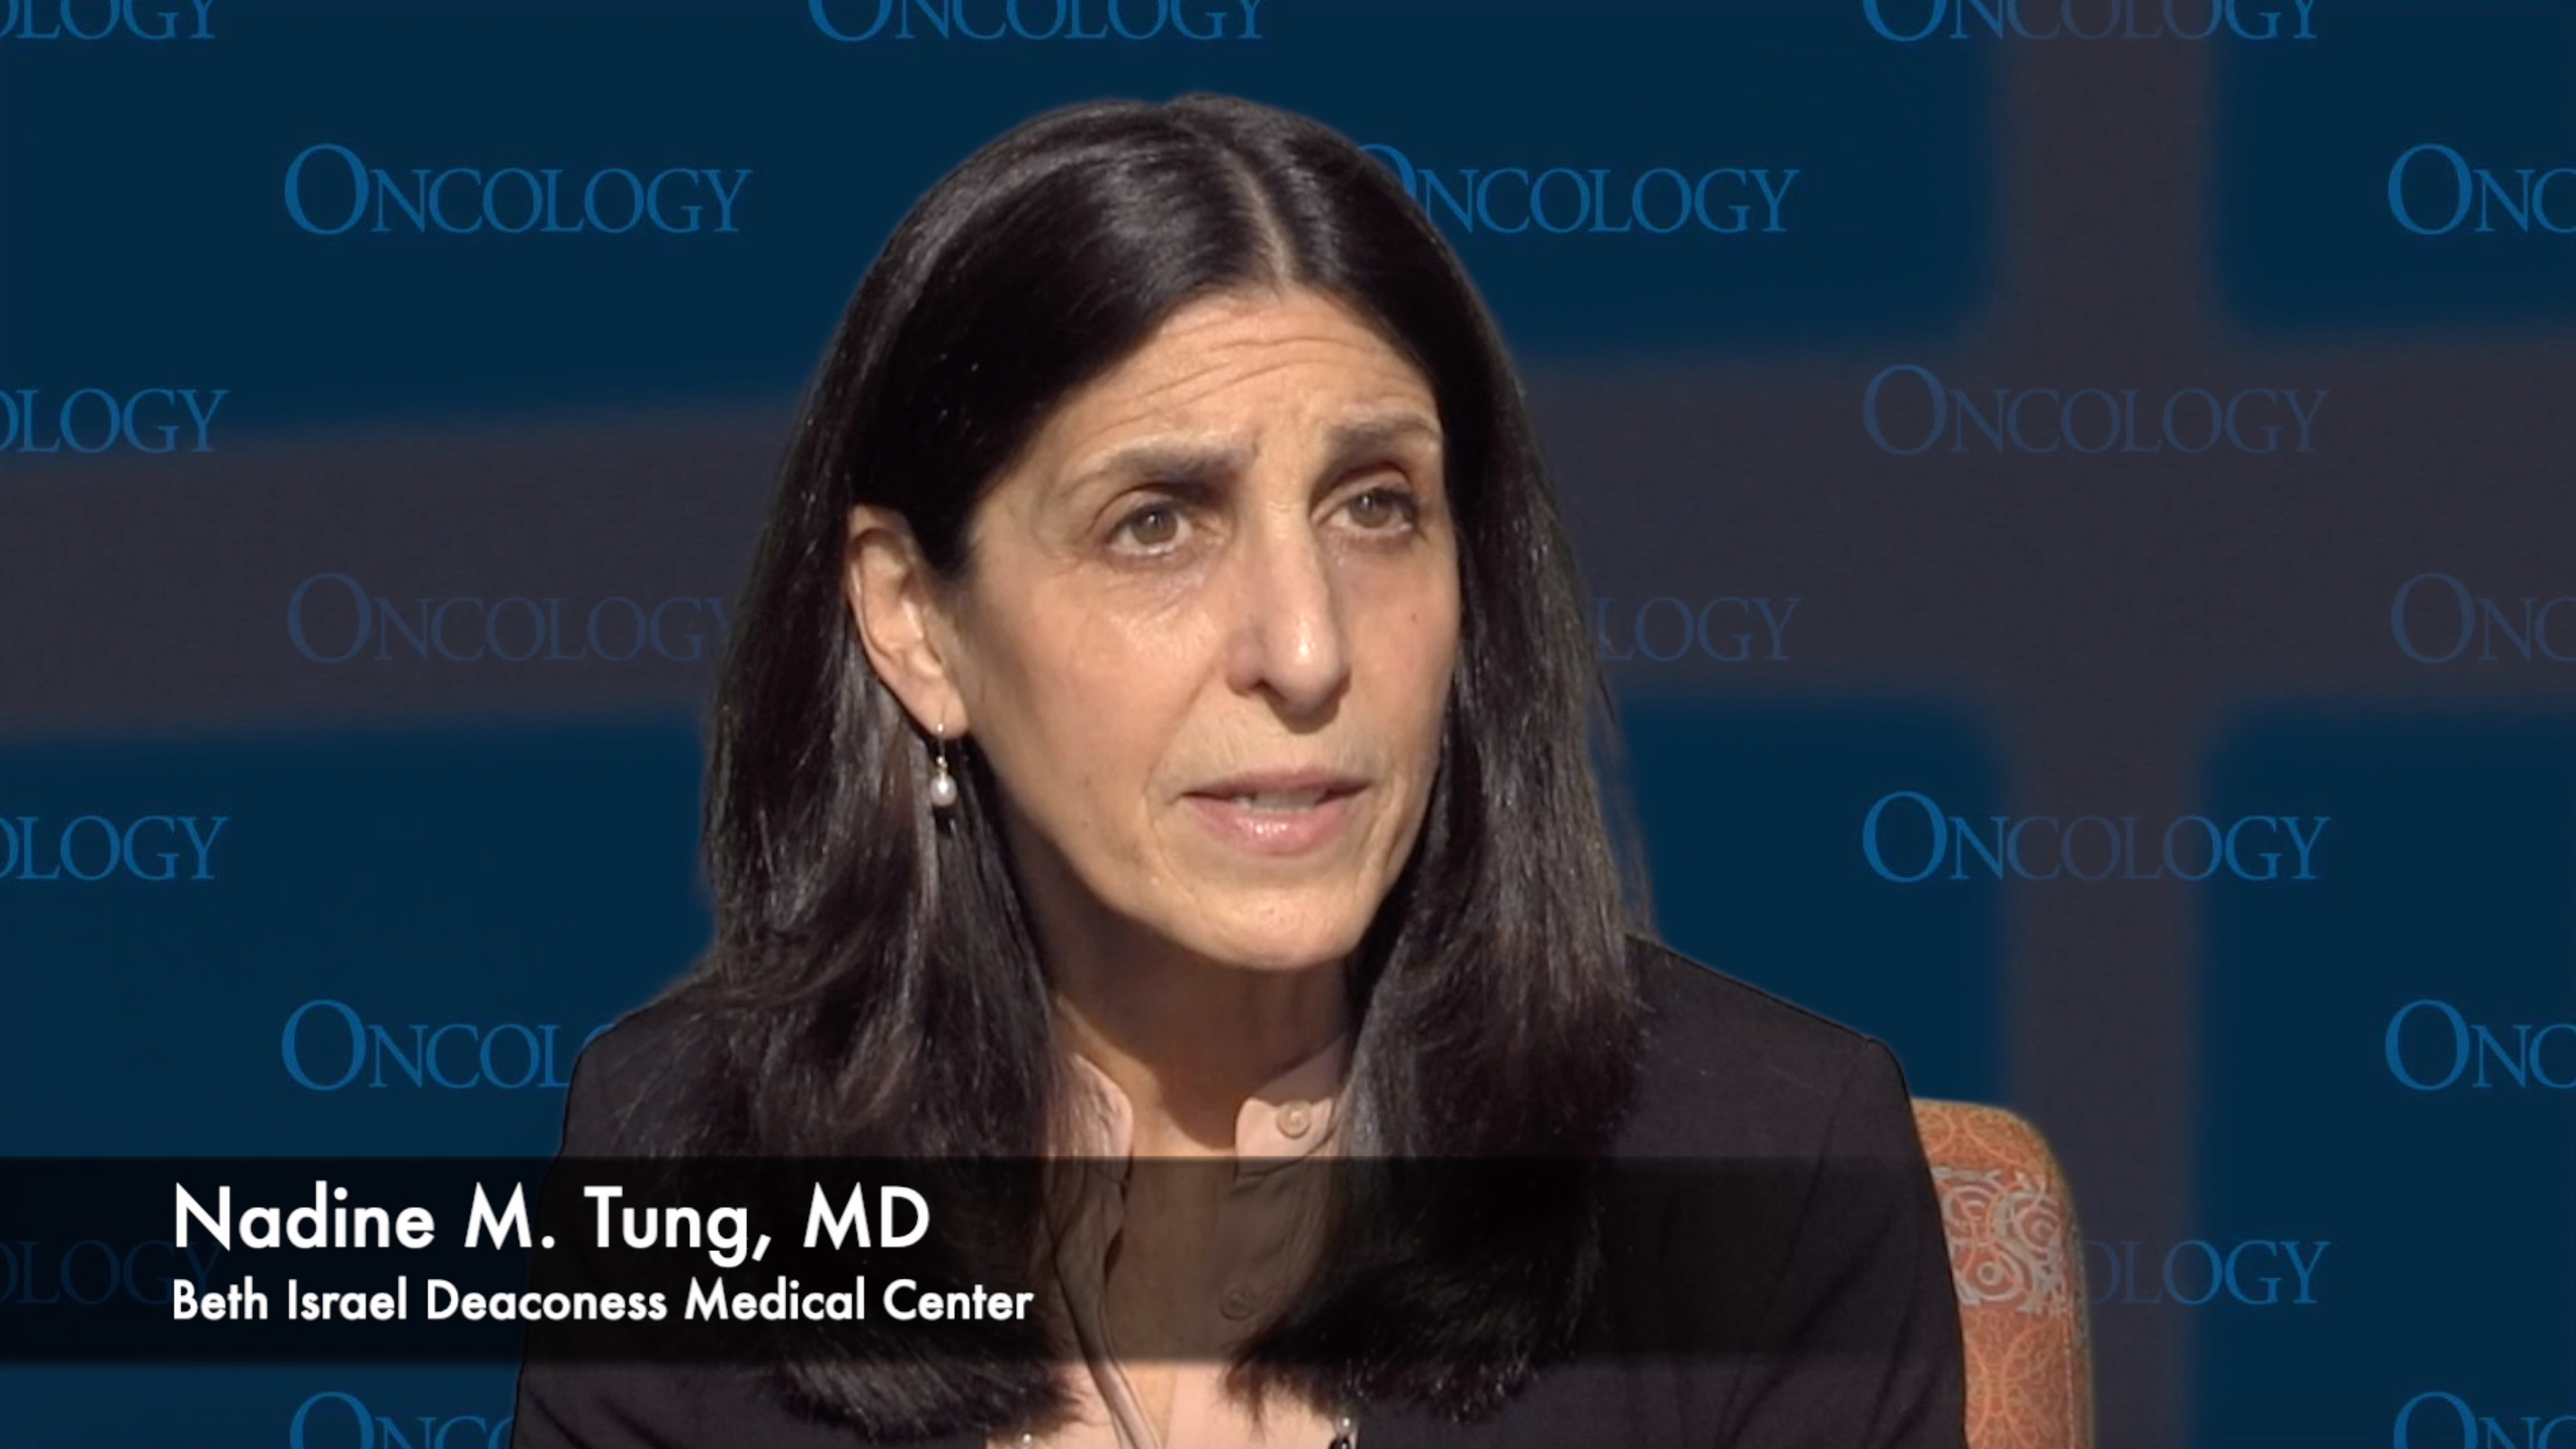 Nadine M. Tung, MD, Discusses Germline Testing in Patients with Breast Cancer